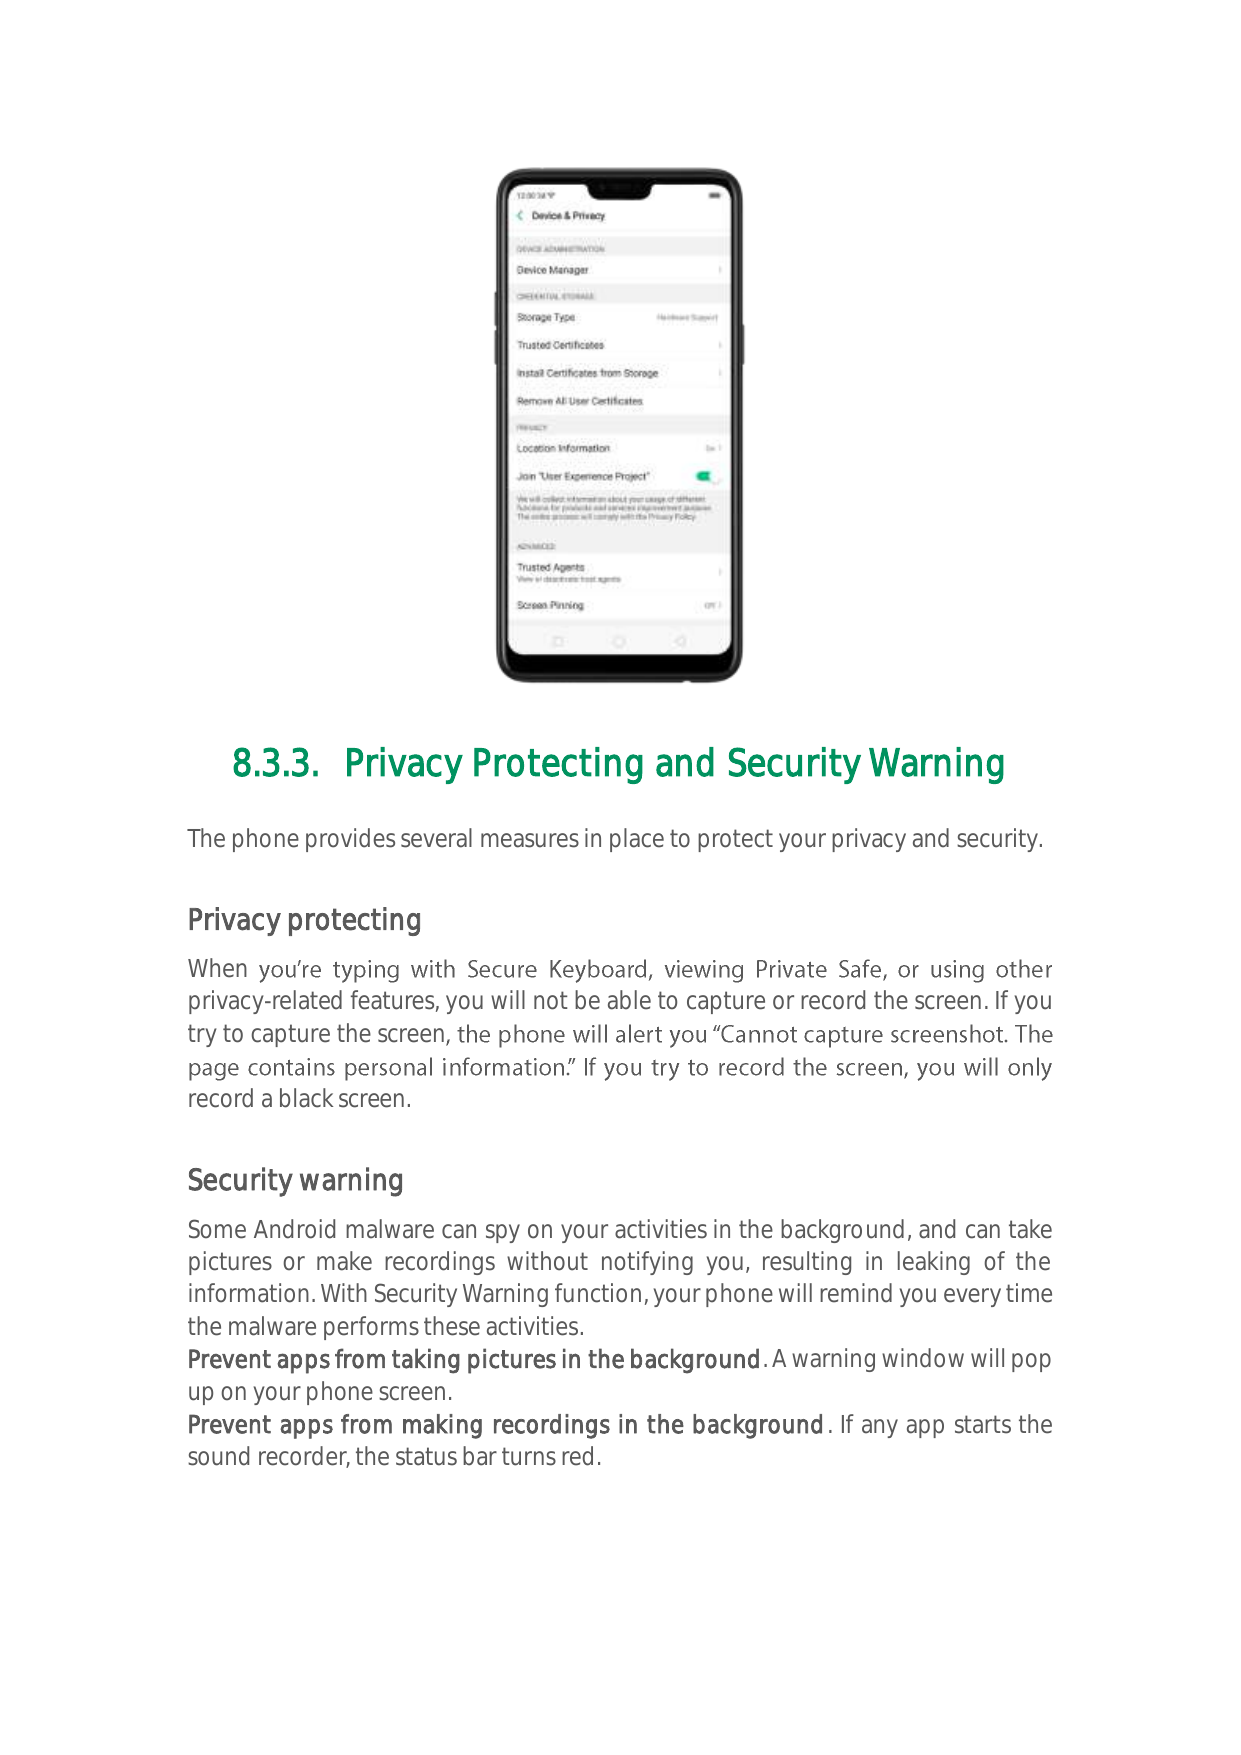 8.3.3. Privacy Protecting and Security WarningThe phone provides several measures in place to protect your privacy and security.